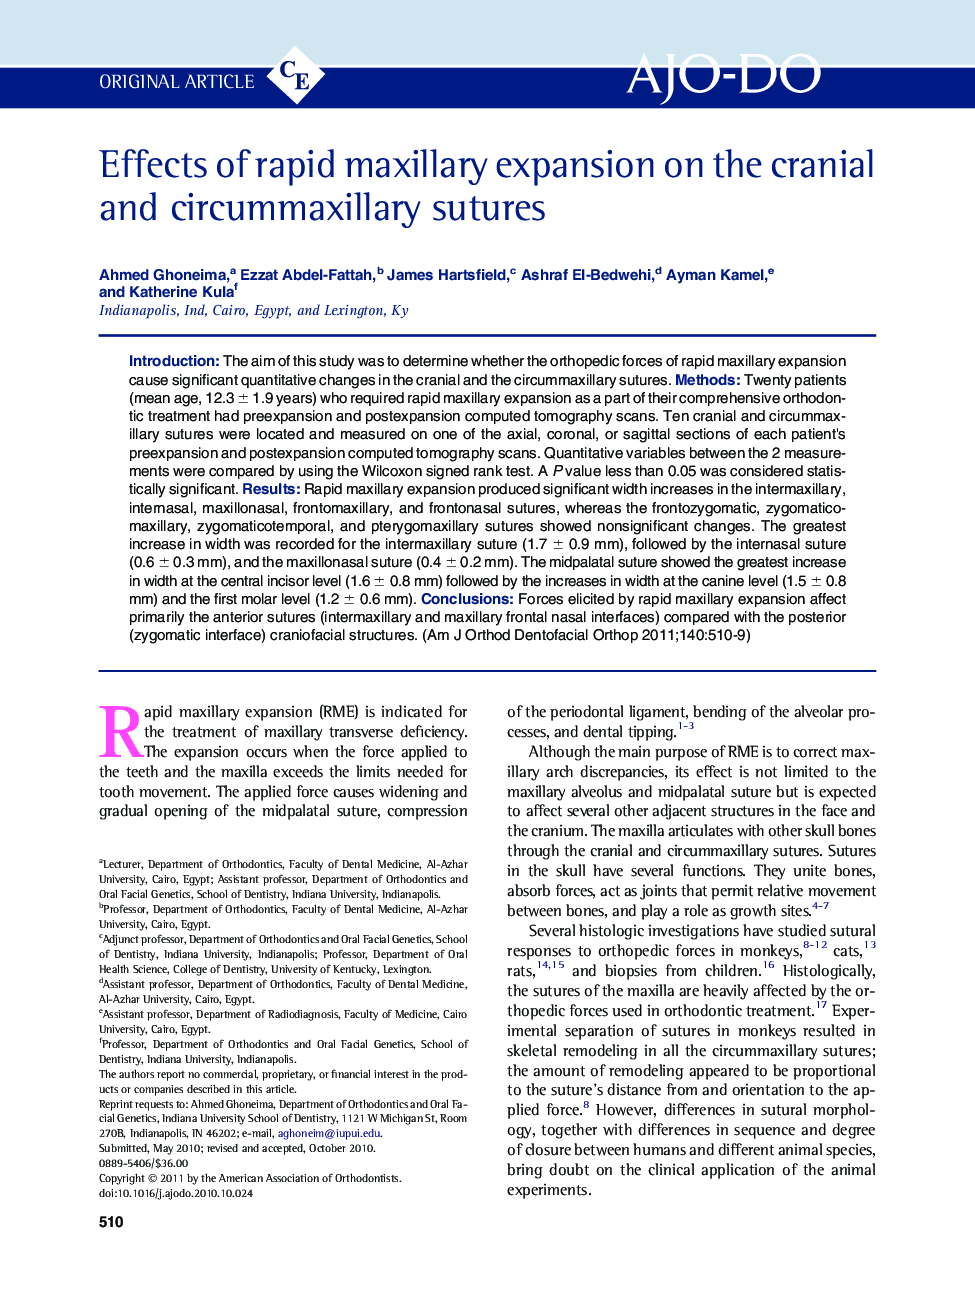 Effects of rapid maxillary expansion on the cranial and circummaxillary sutures 